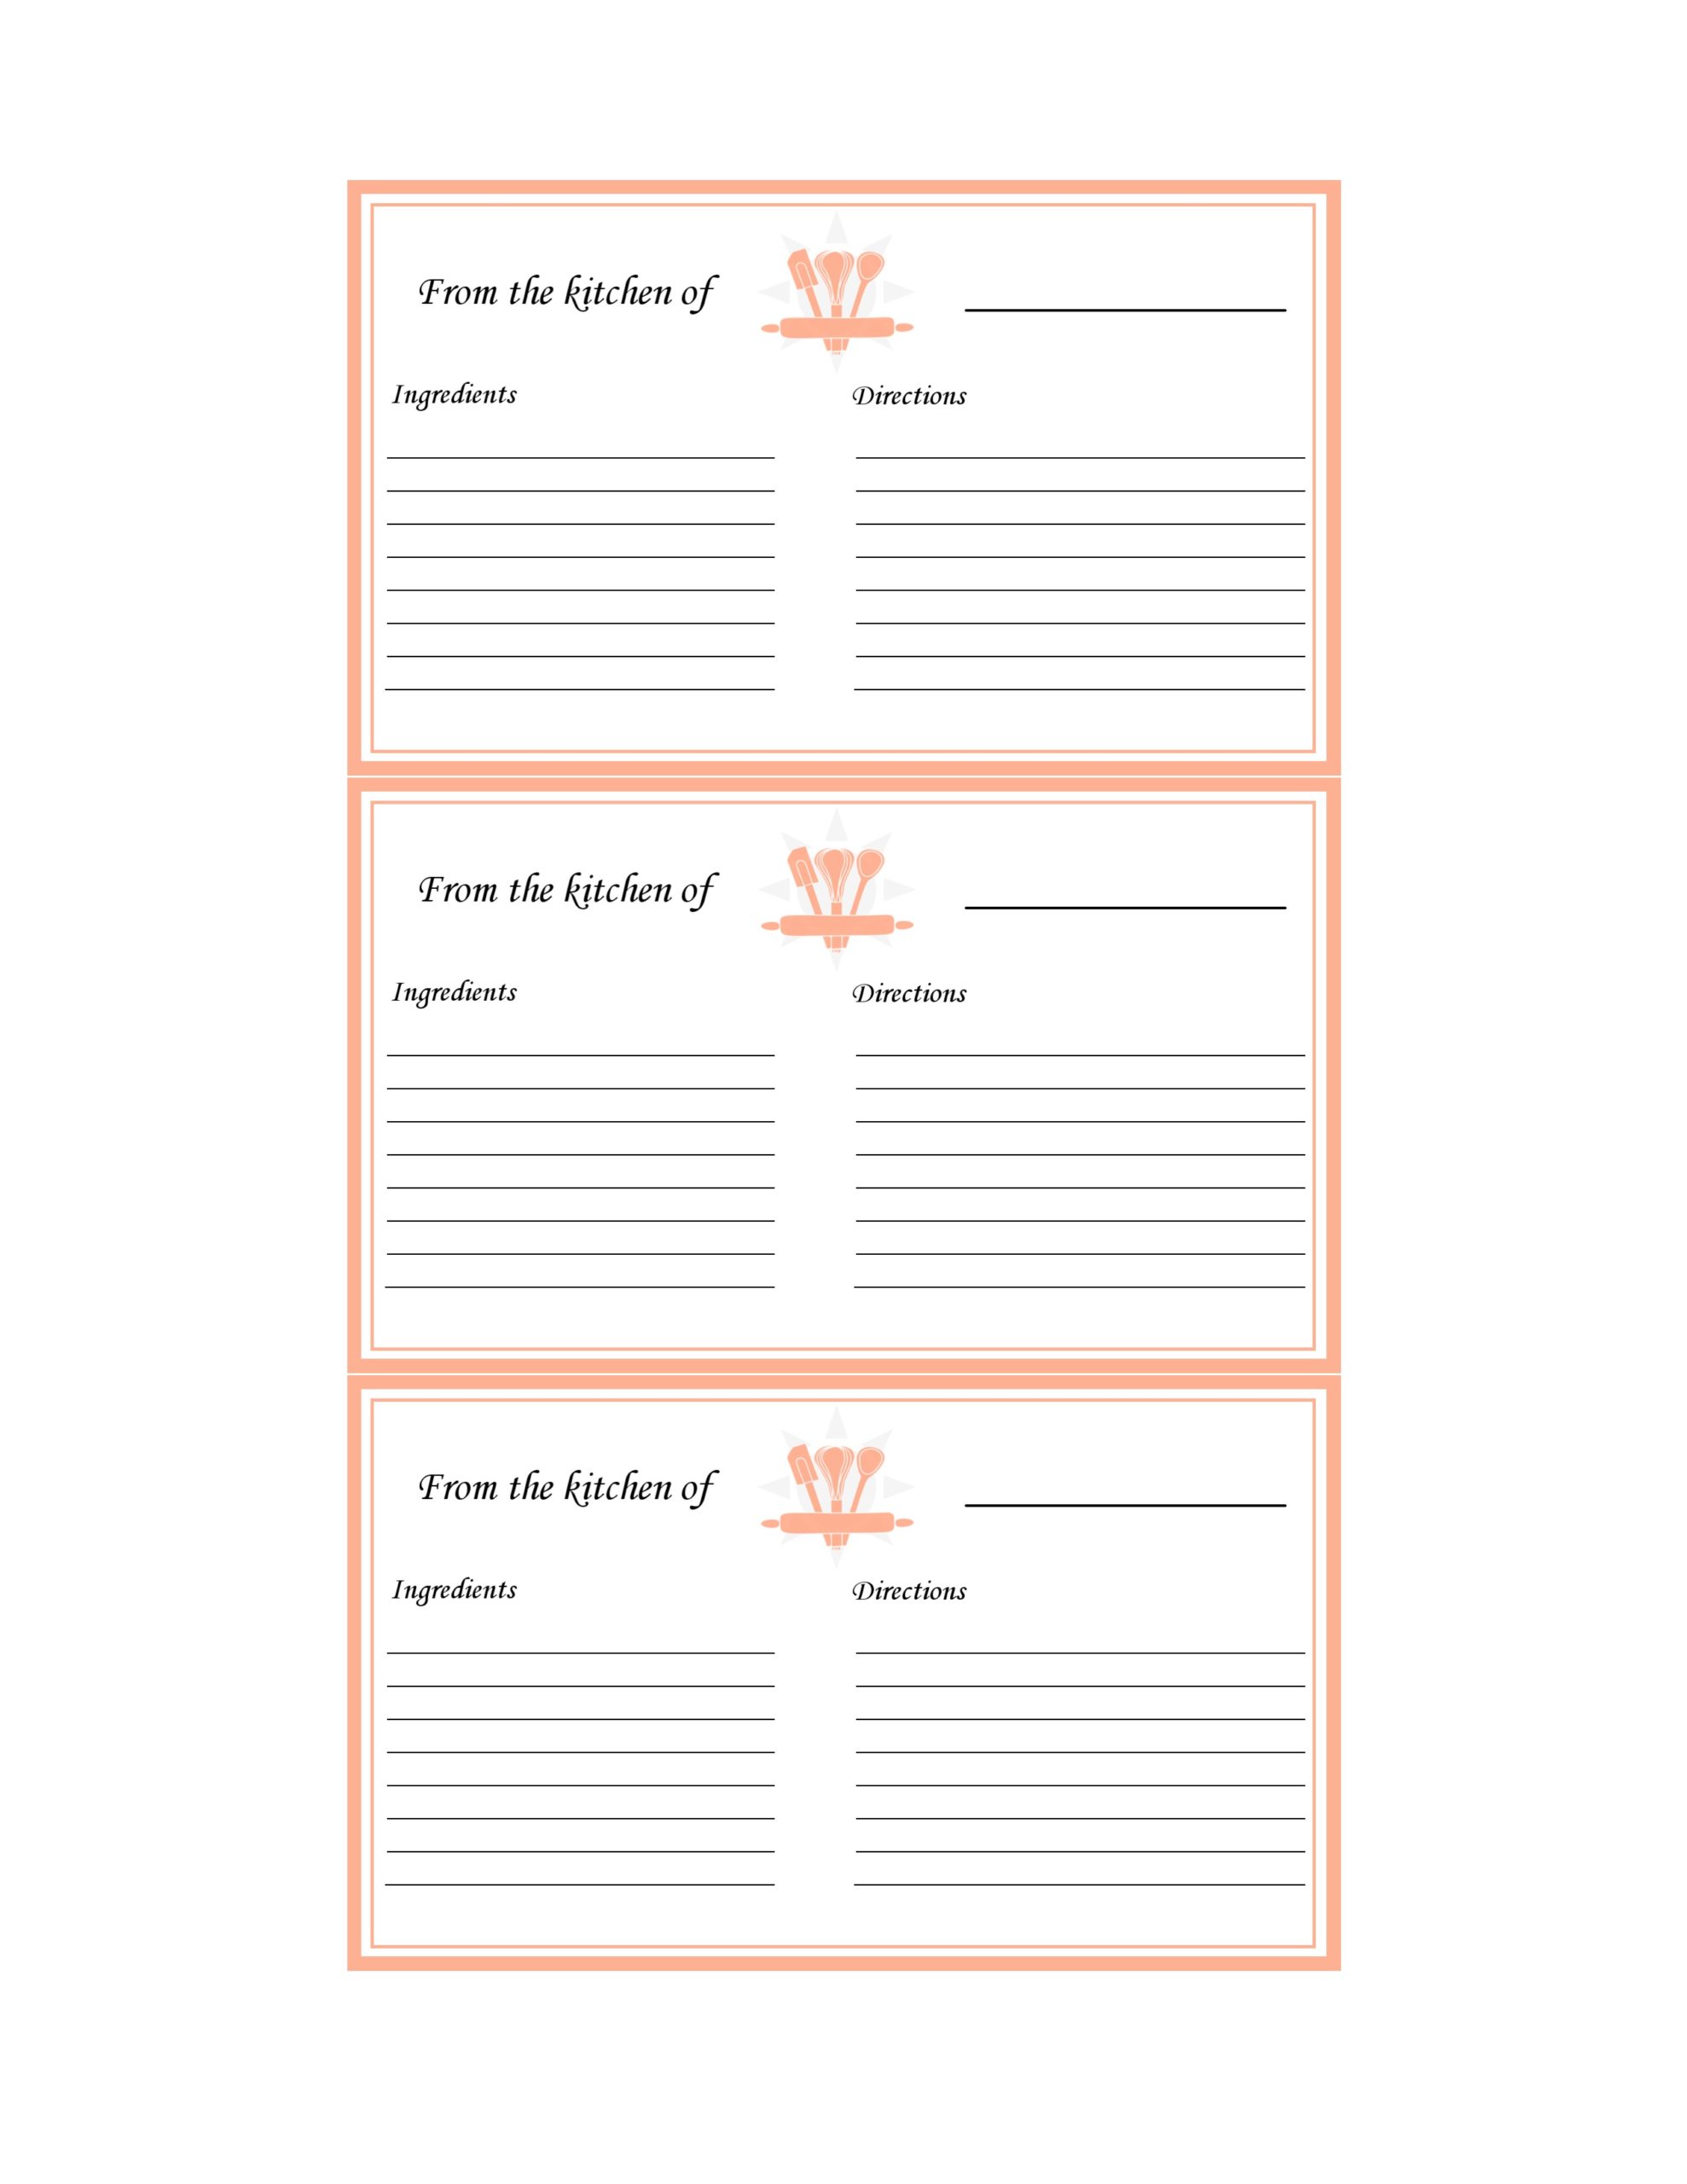 22 Free Recipe Card Templates (Word, Google Docs) - TemplateArchive Intended For Fillable Recipe Card Template